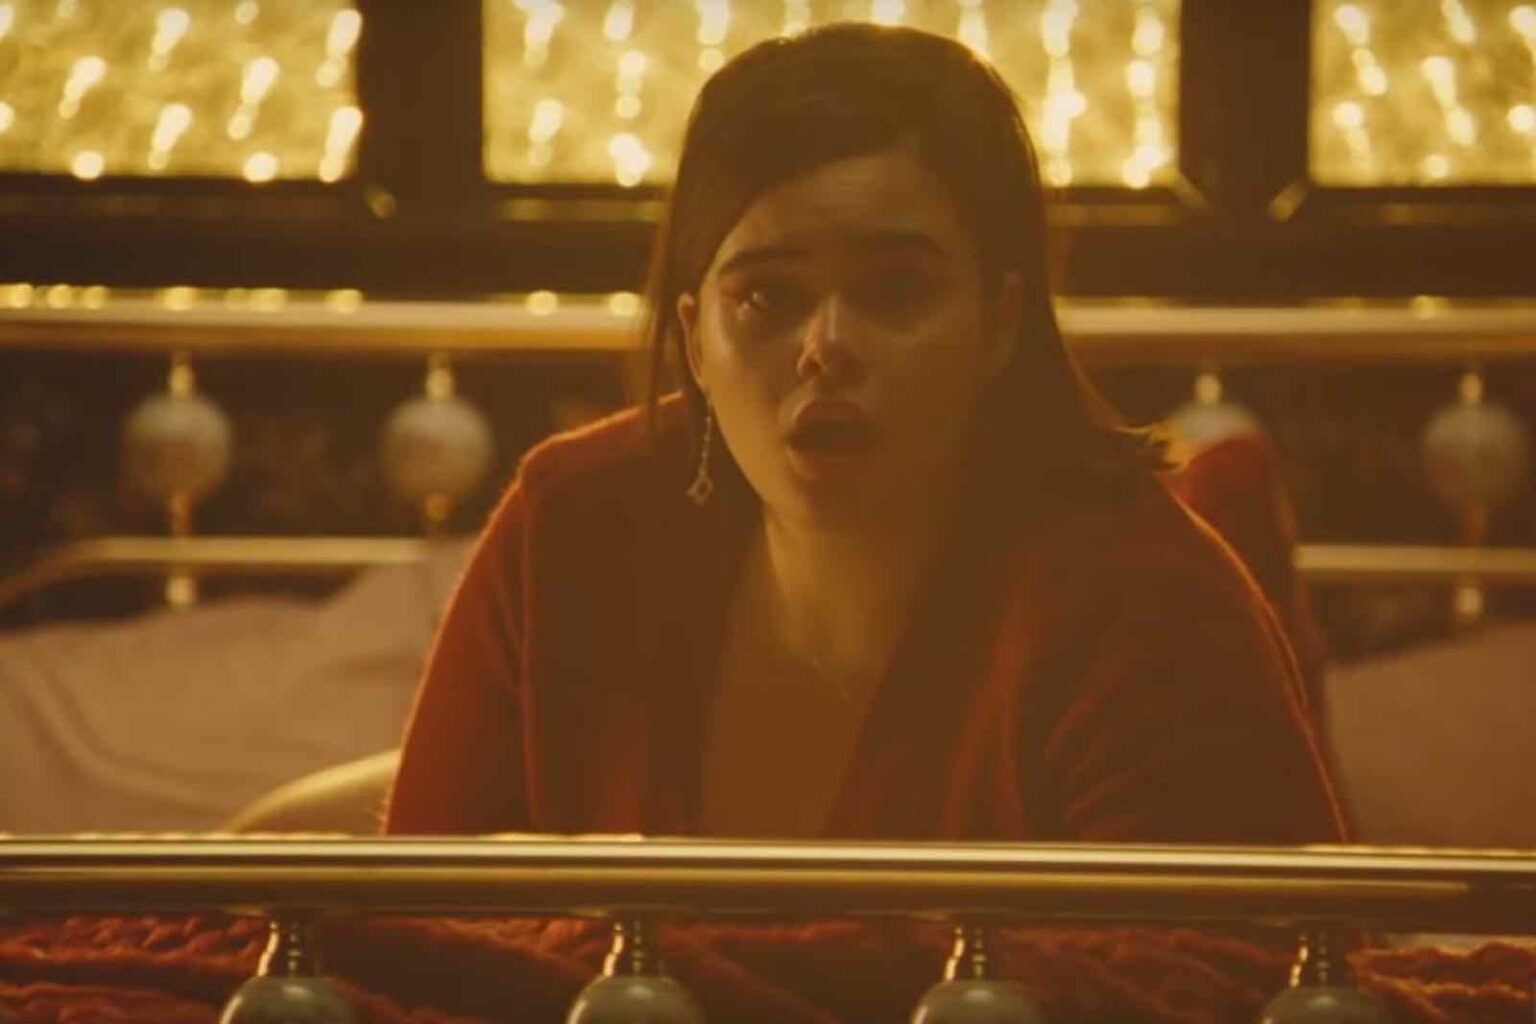 Was Barbie Ferreira fired from Euphoria, or did she leave because she was just too good for them? Take a look at all the details!